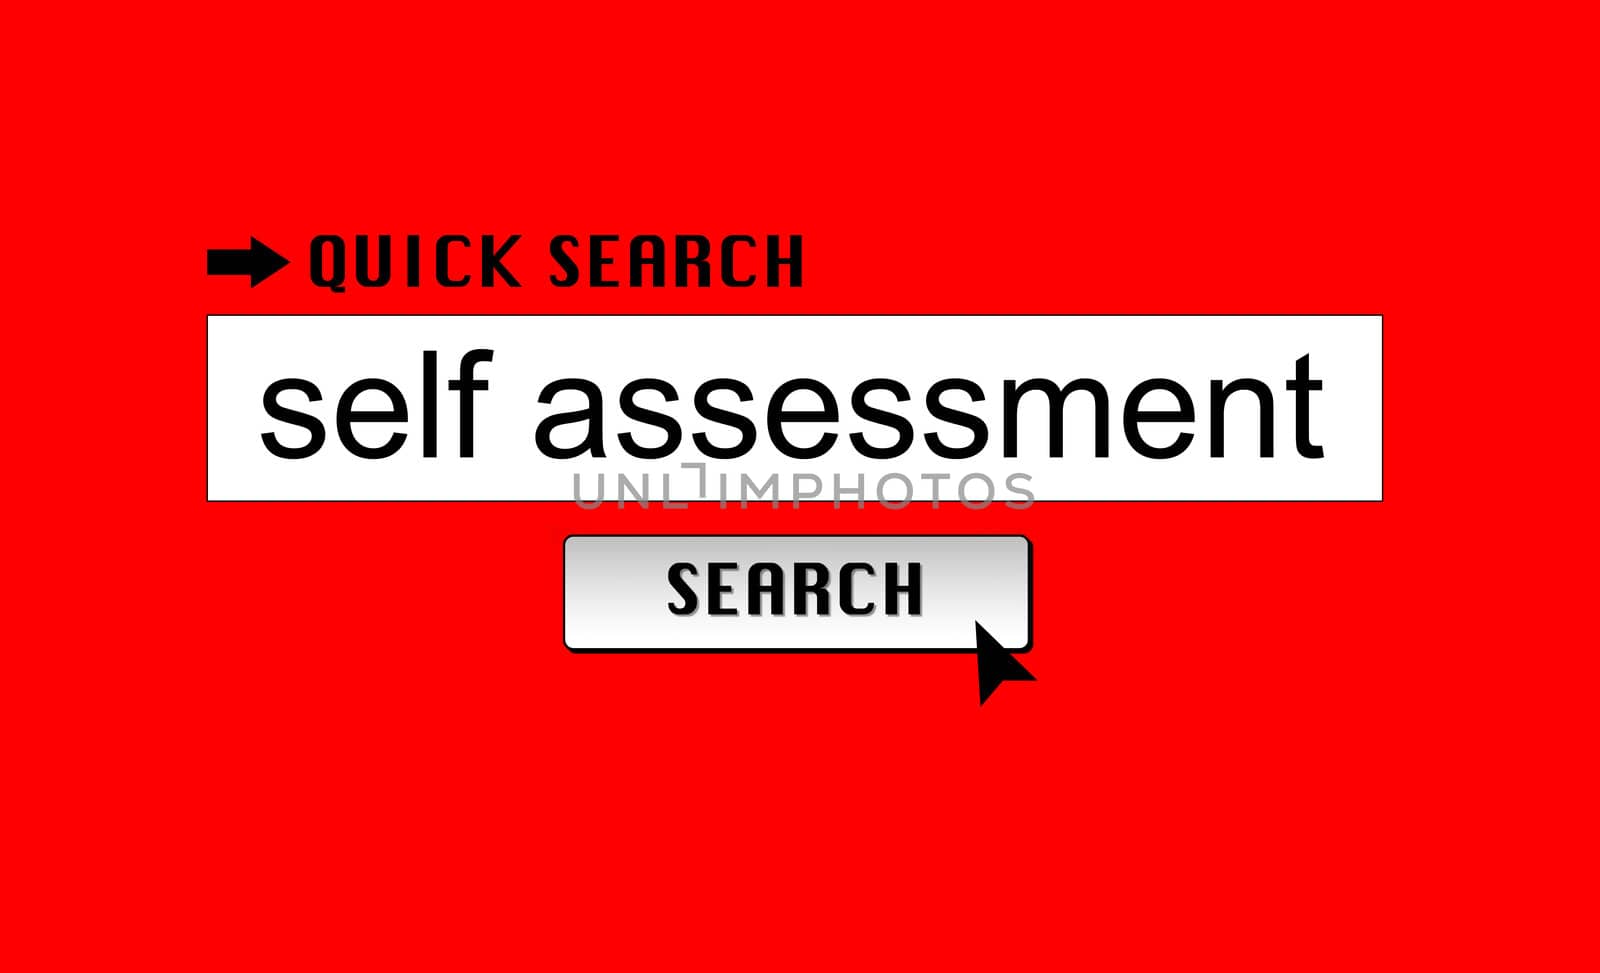 Searching for 'self assessment' in an internet search engine.